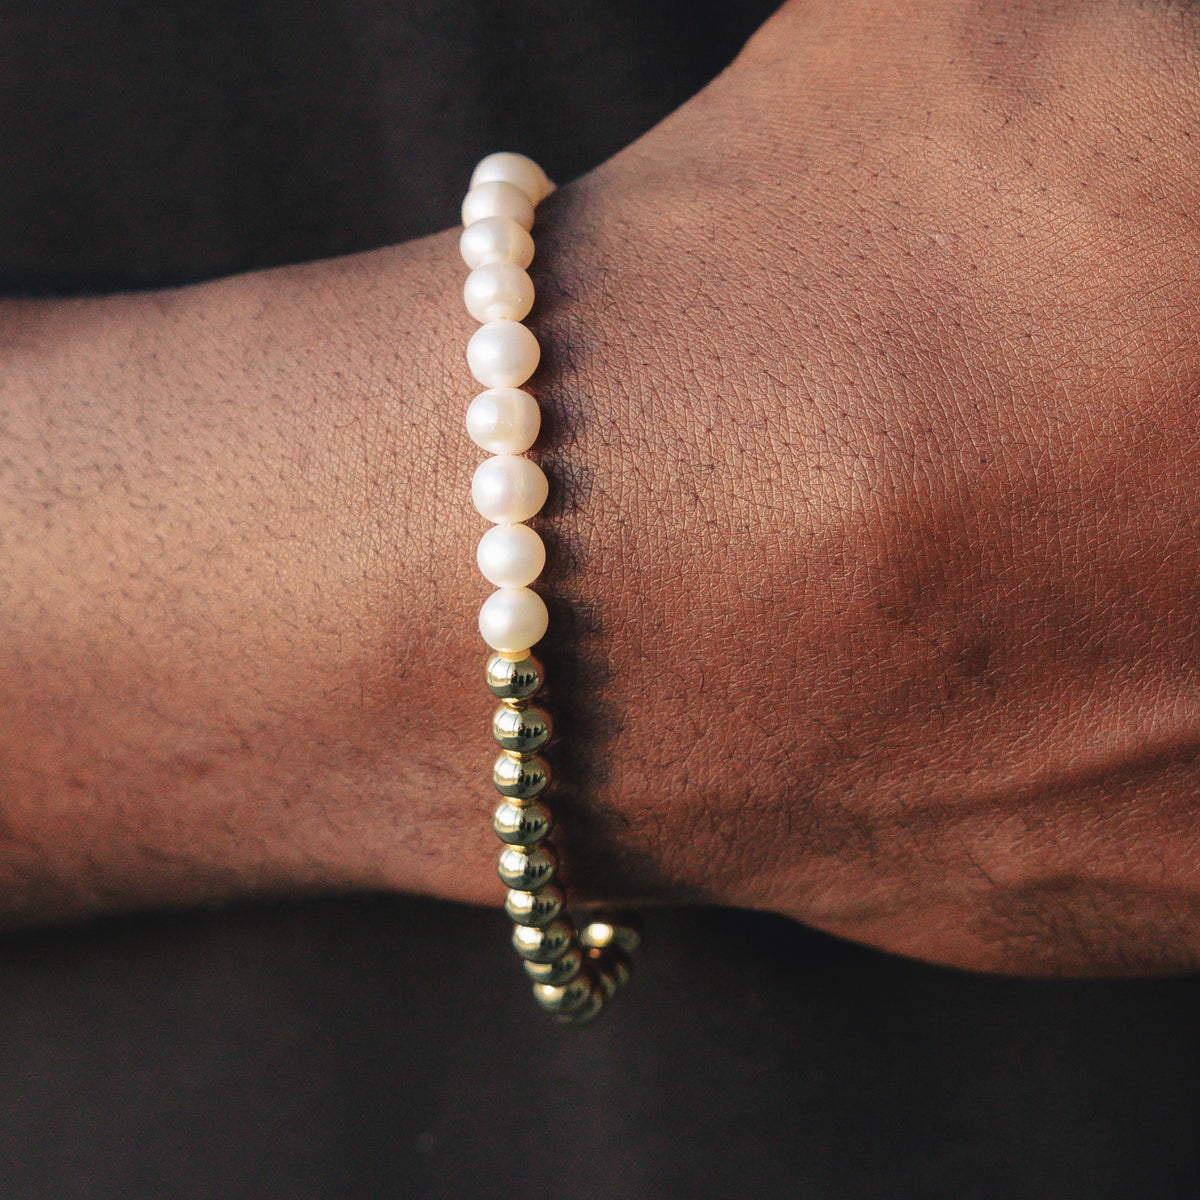 Men's Pearl Wristband with Hand-Painted Glass Beads XL (19cm / 7.5”)